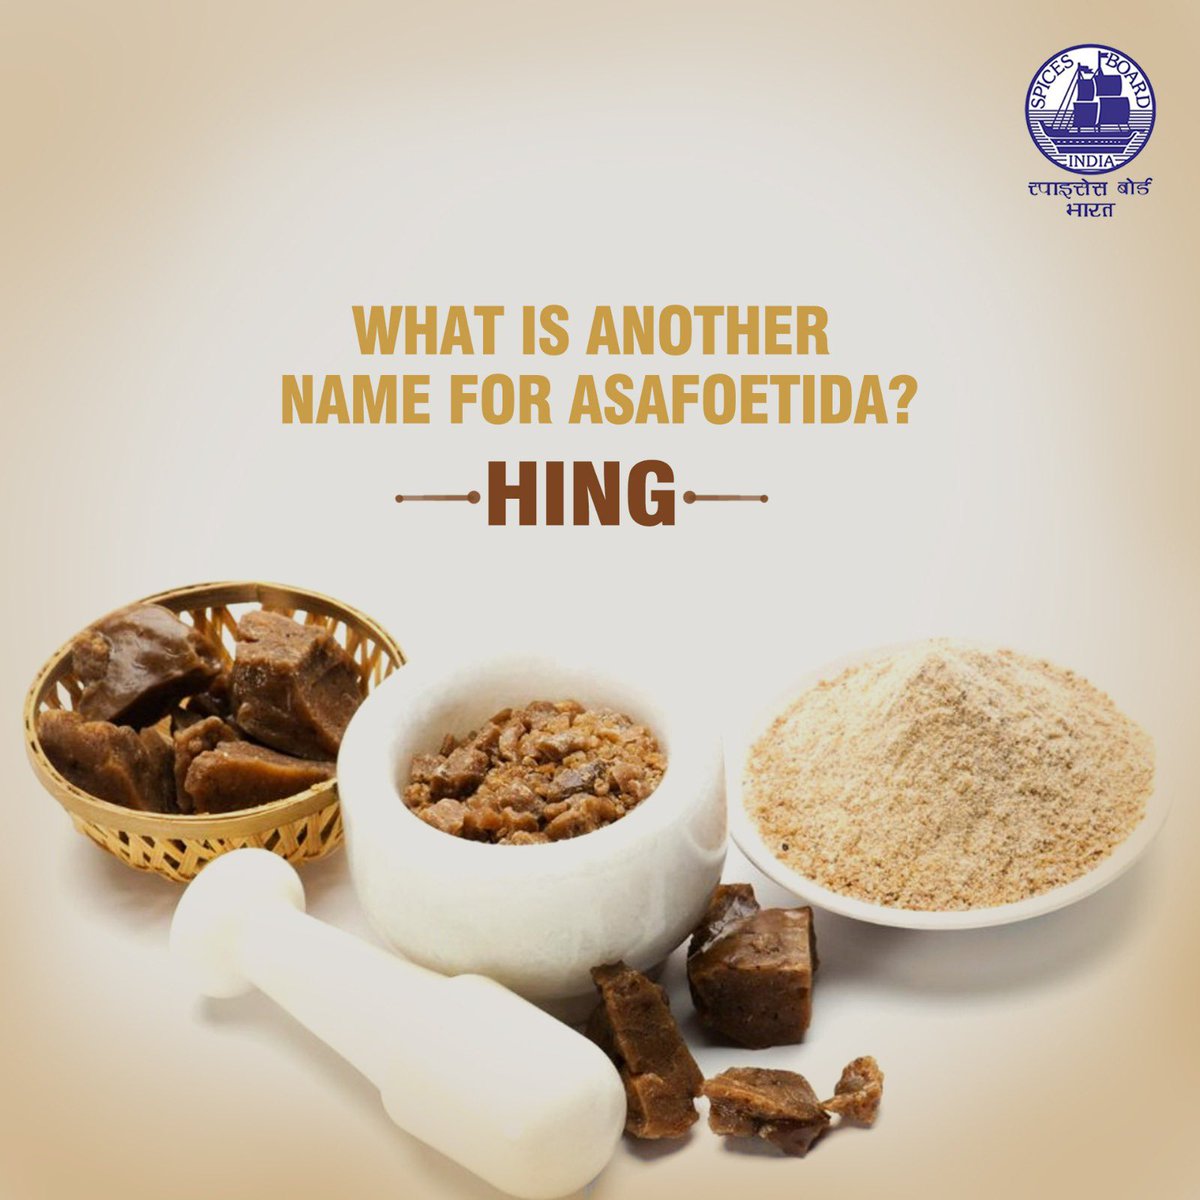 Are you familiar with the common name for Asafoetida? @doc_goi #spicesboard #asafoetida #incrediblespicesofindia